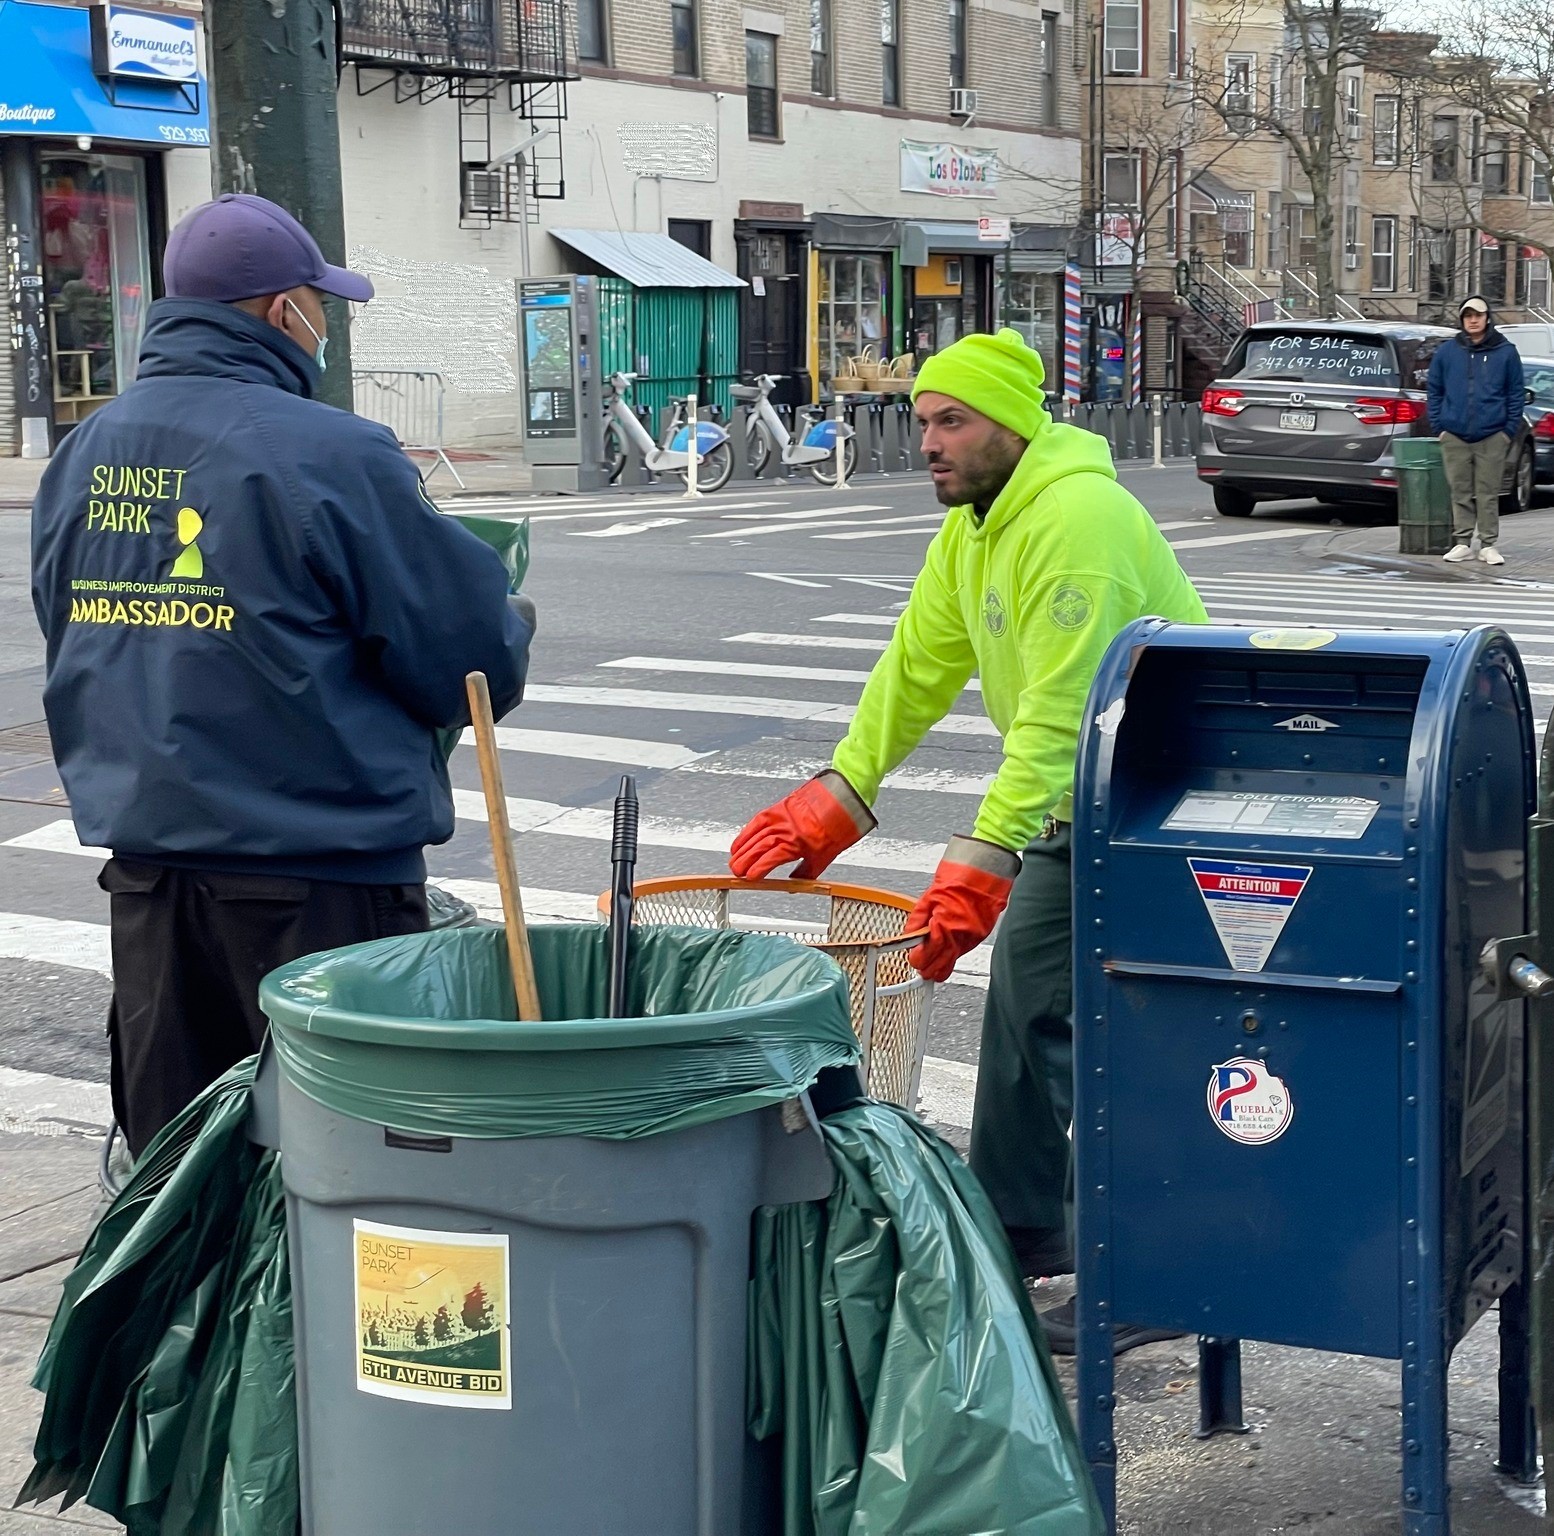 Two sanitation workers in brightly colored jackets chat near a trash bin and mailbox on a busy city street. one worker is handling a broom and dustpan.